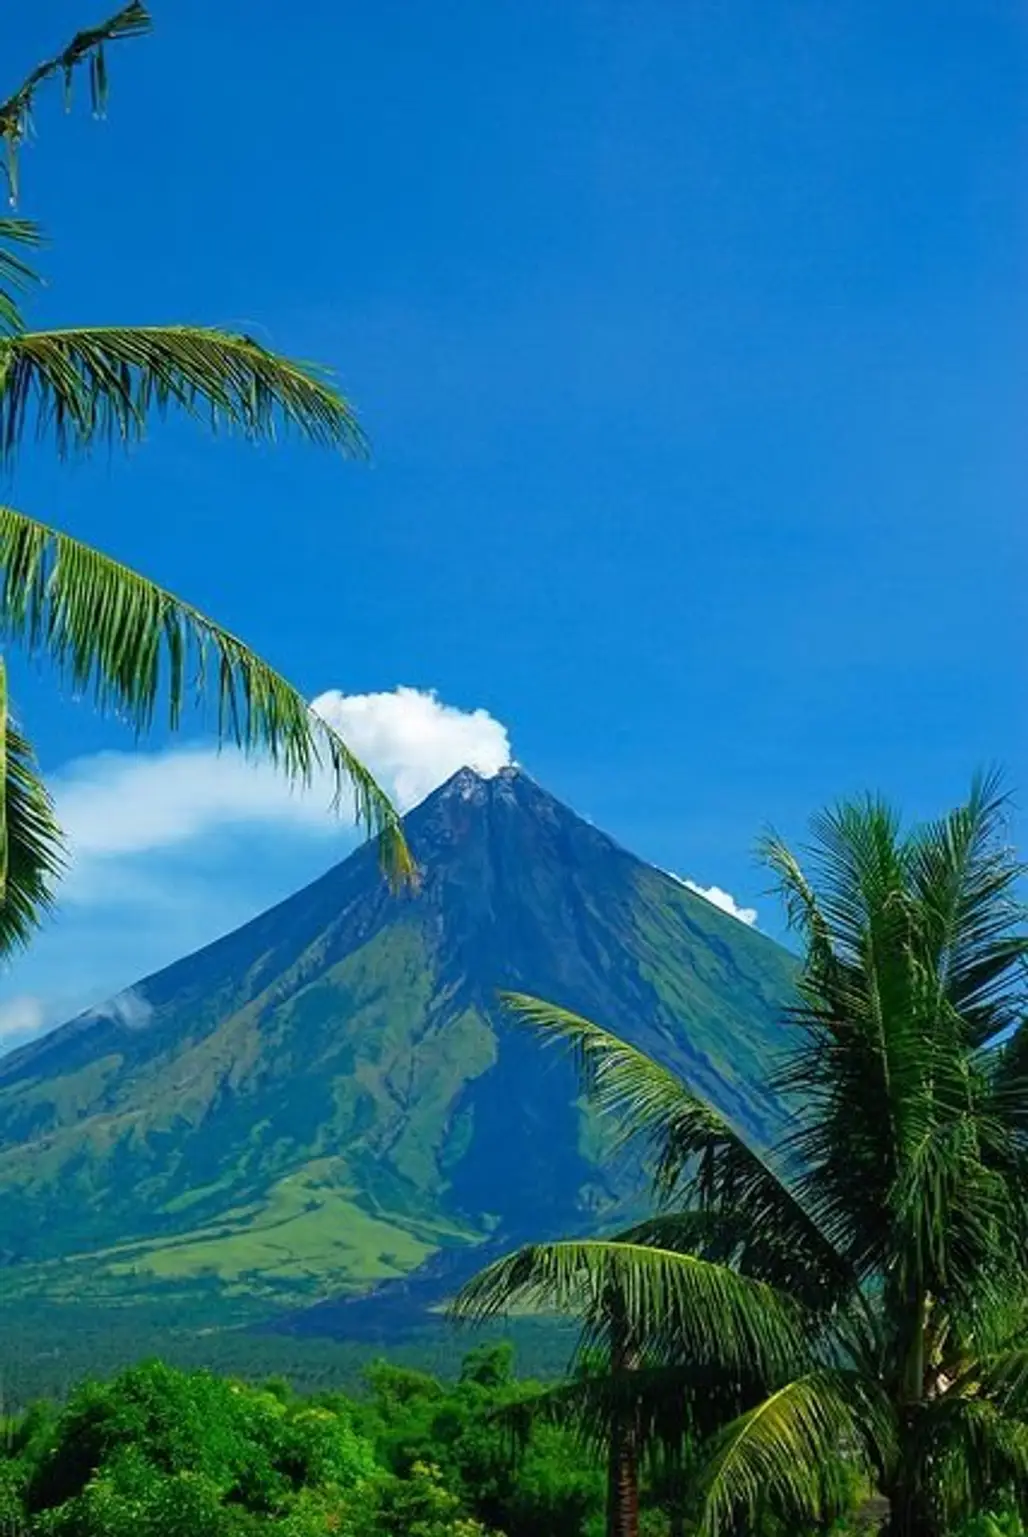 Mayon Volcano, the Philippines